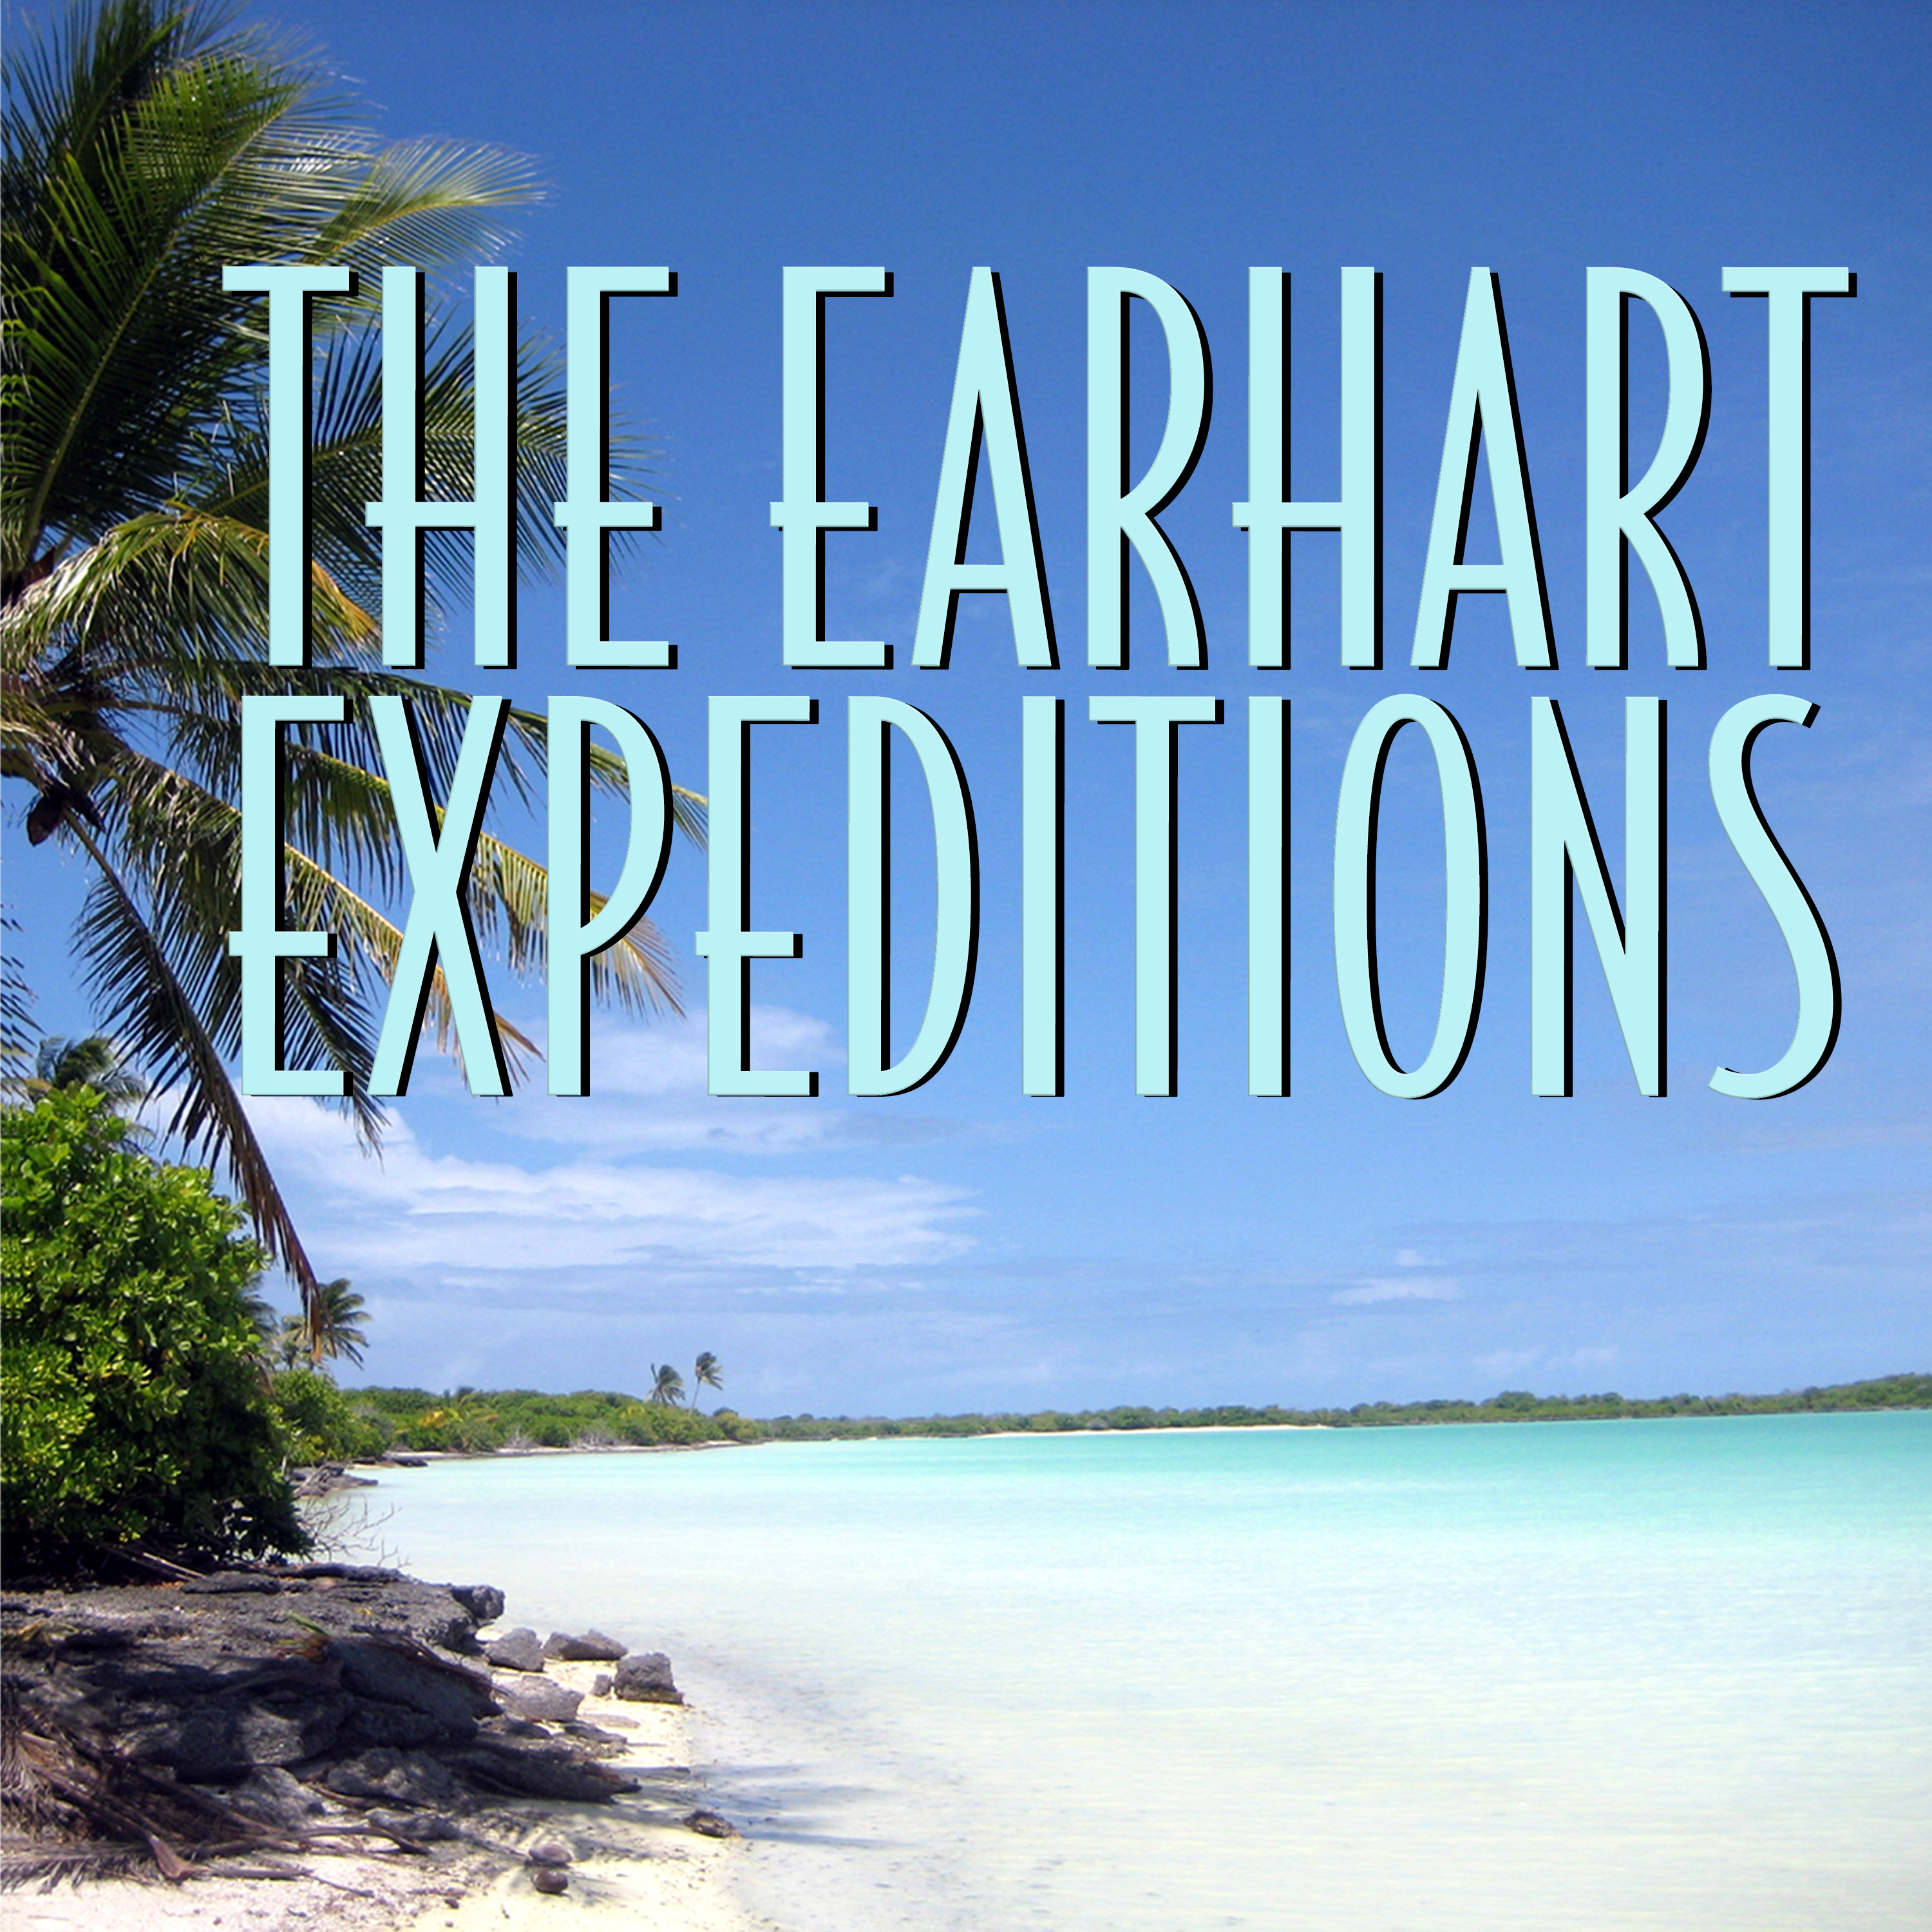 Season Ten: The 2015 Expedition, Episode 4 - Change of Plans